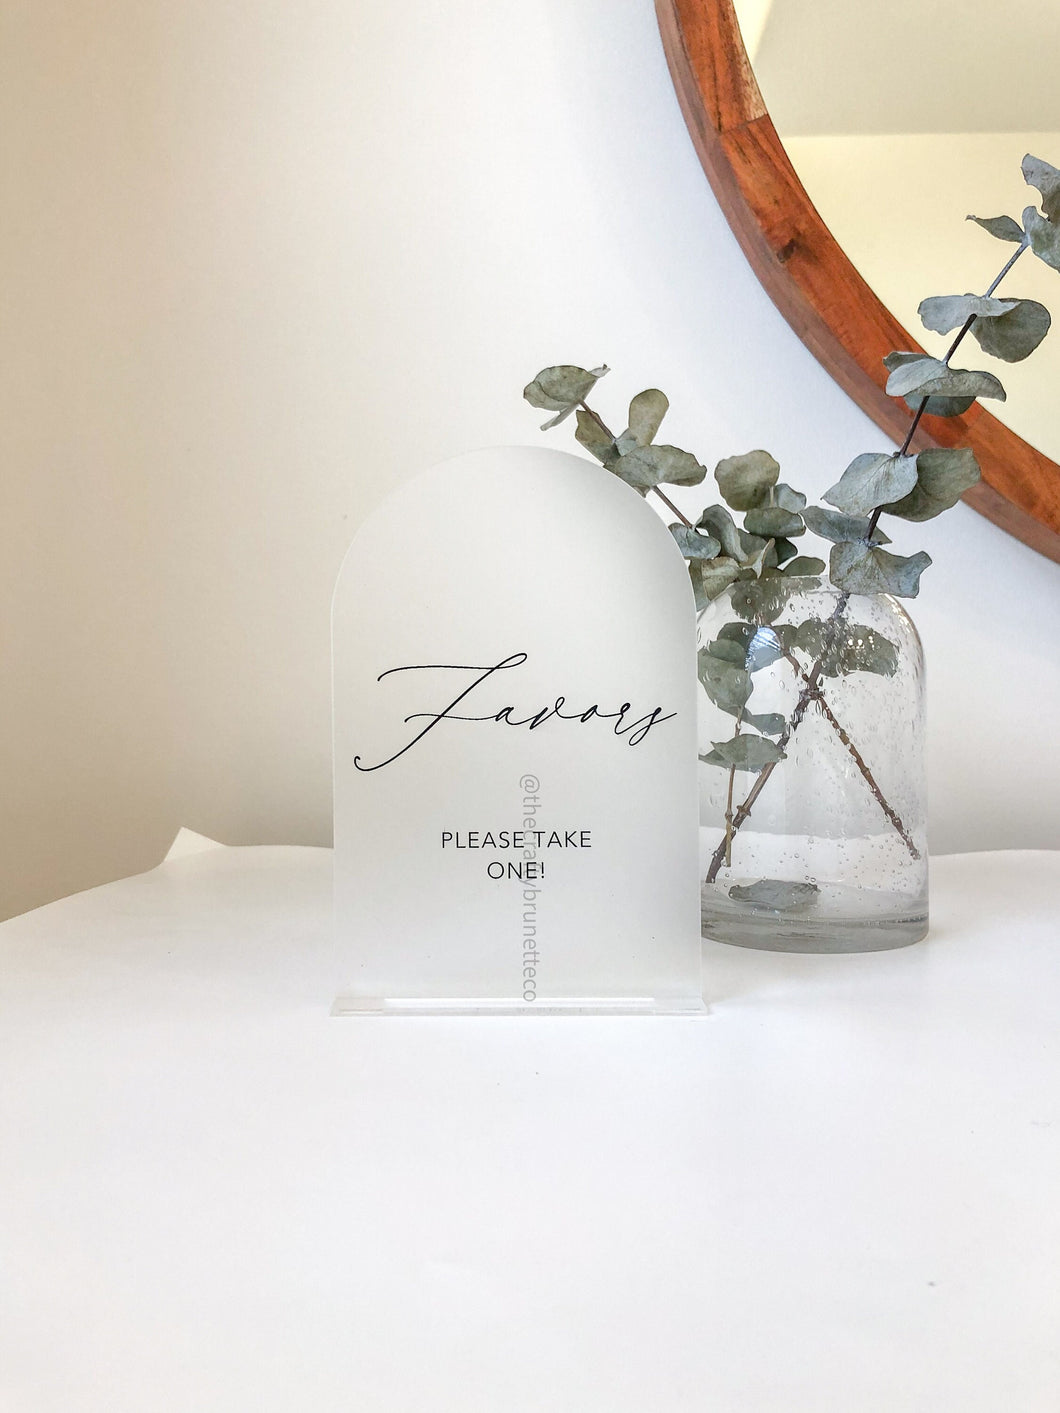 Frosted Acrylic Favour Sign, Wedding Favor Sign, Frosted Acrylic Sign with Stand, Please take a Favor, Wedding Guest Favors, Wedding Signage